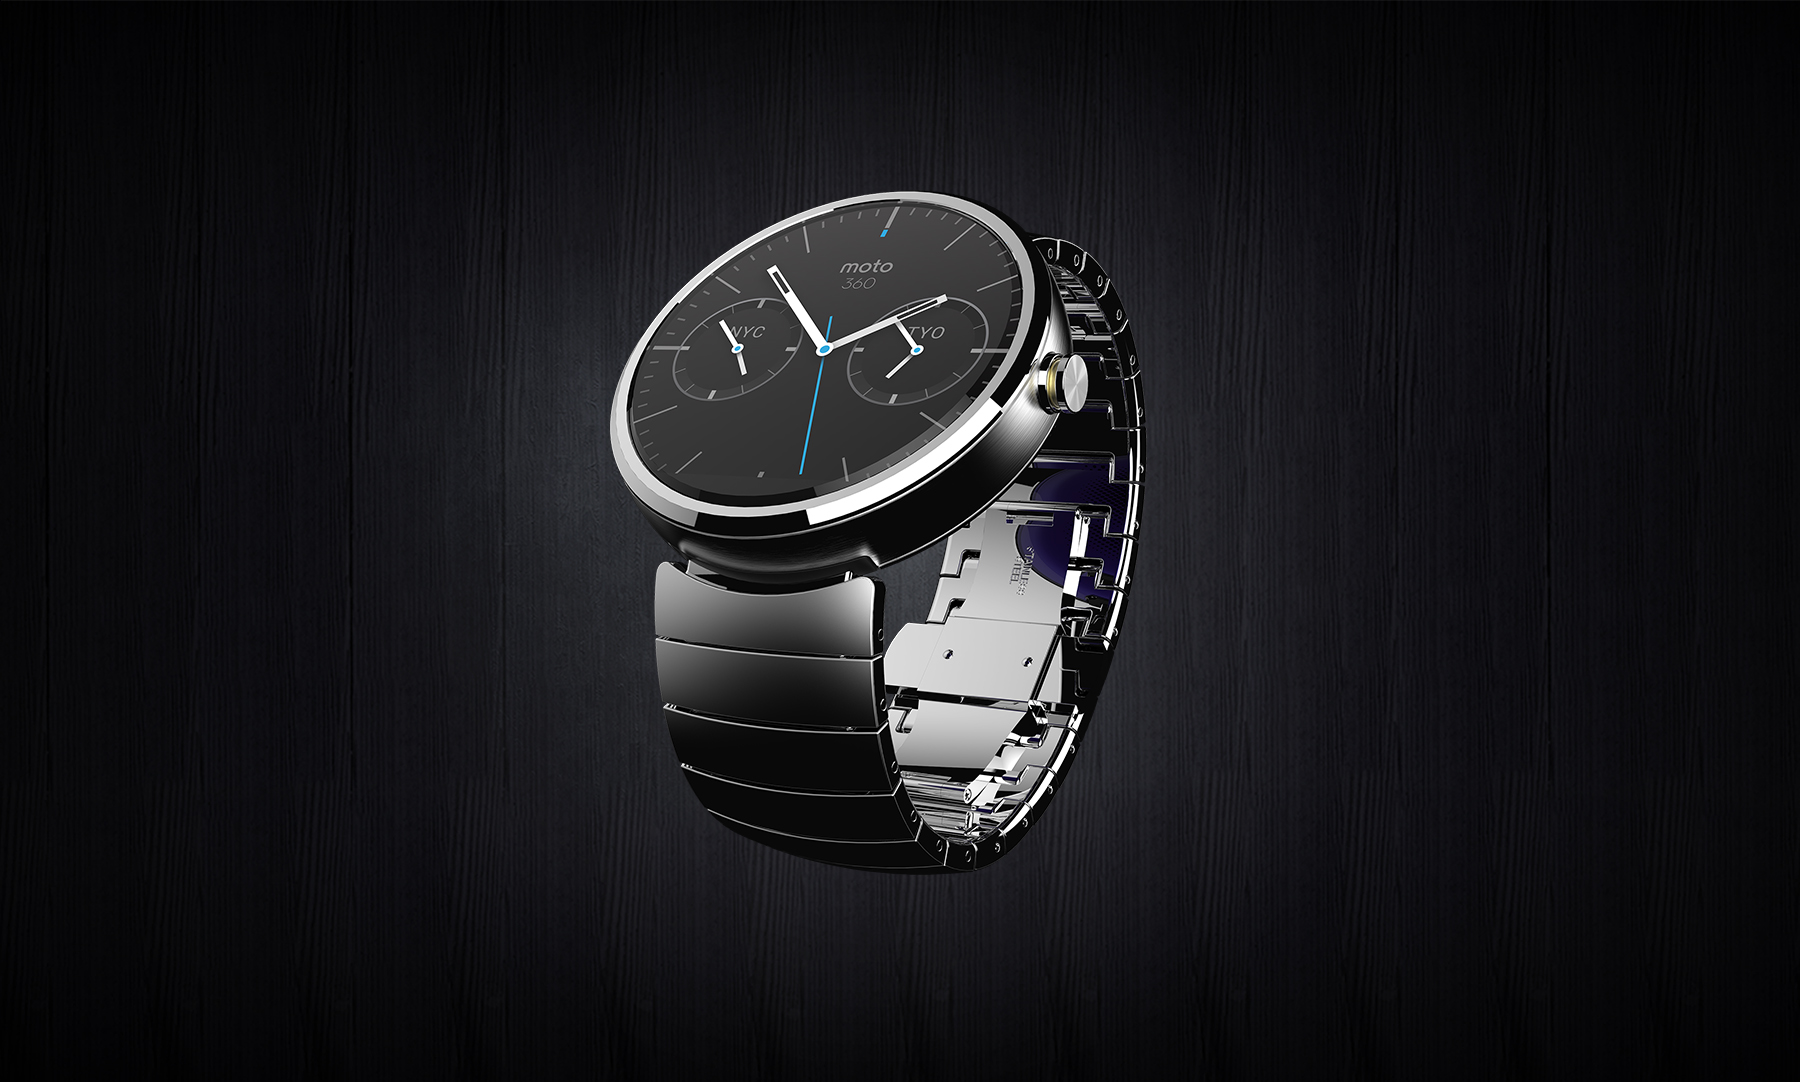 The Moto 360 attempts to break the mold in terms of smartwatch design.